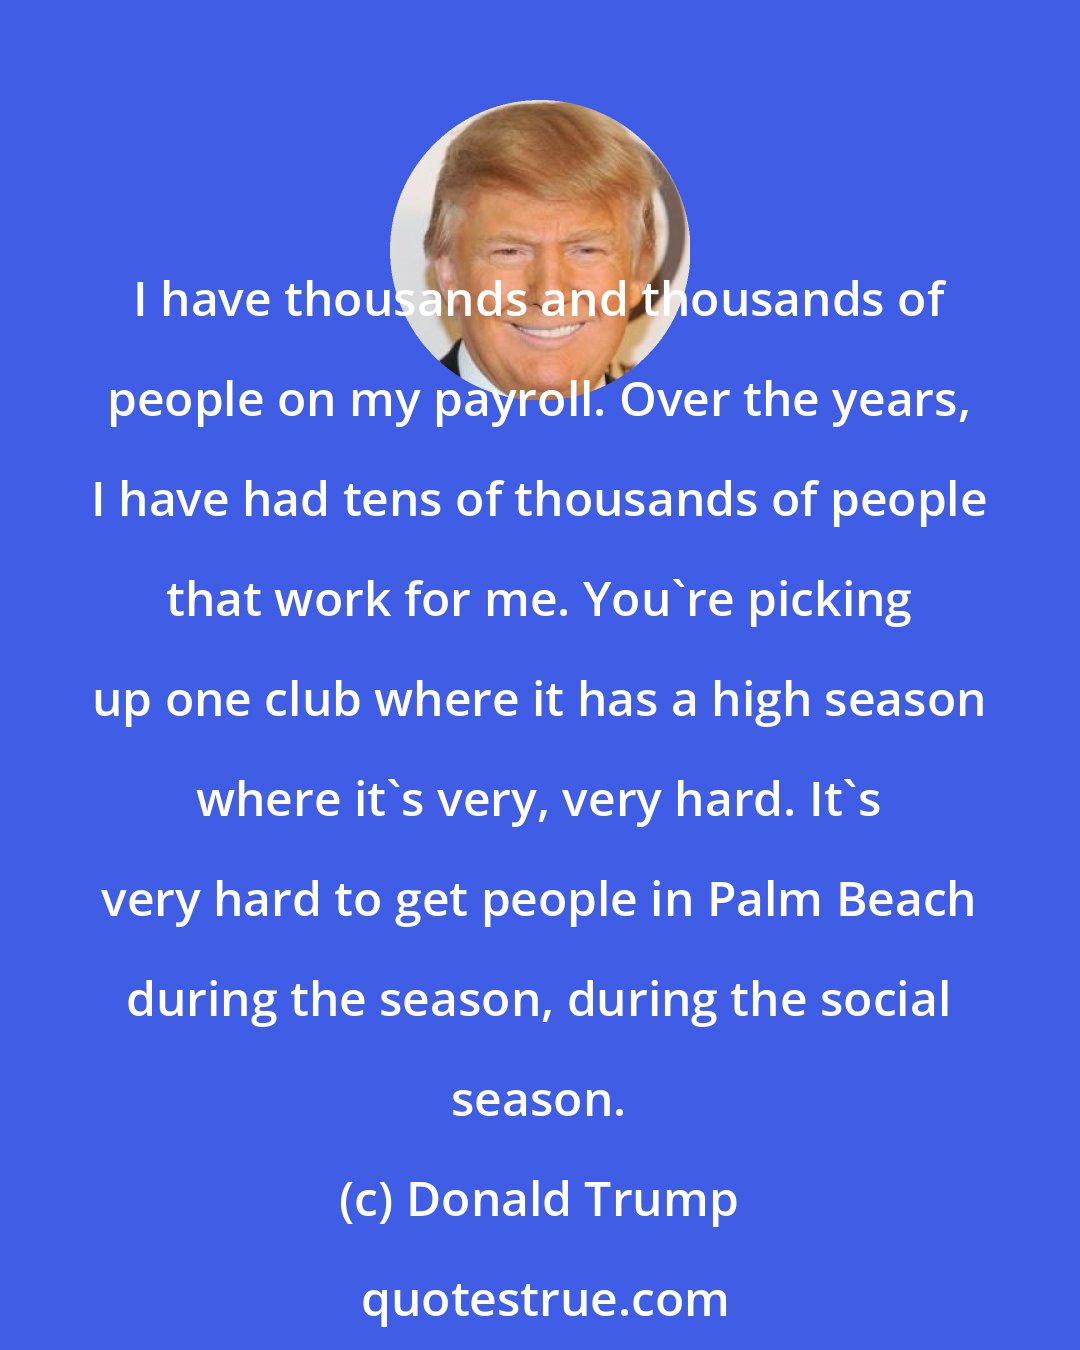 Donald Trump: I have thousands and thousands of people on my payroll. Over the years, I have had tens of thousands of people that work for me. You're picking up one club where it has a high season where it's very, very hard. It's very hard to get people in Palm Beach during the season, during the social season.